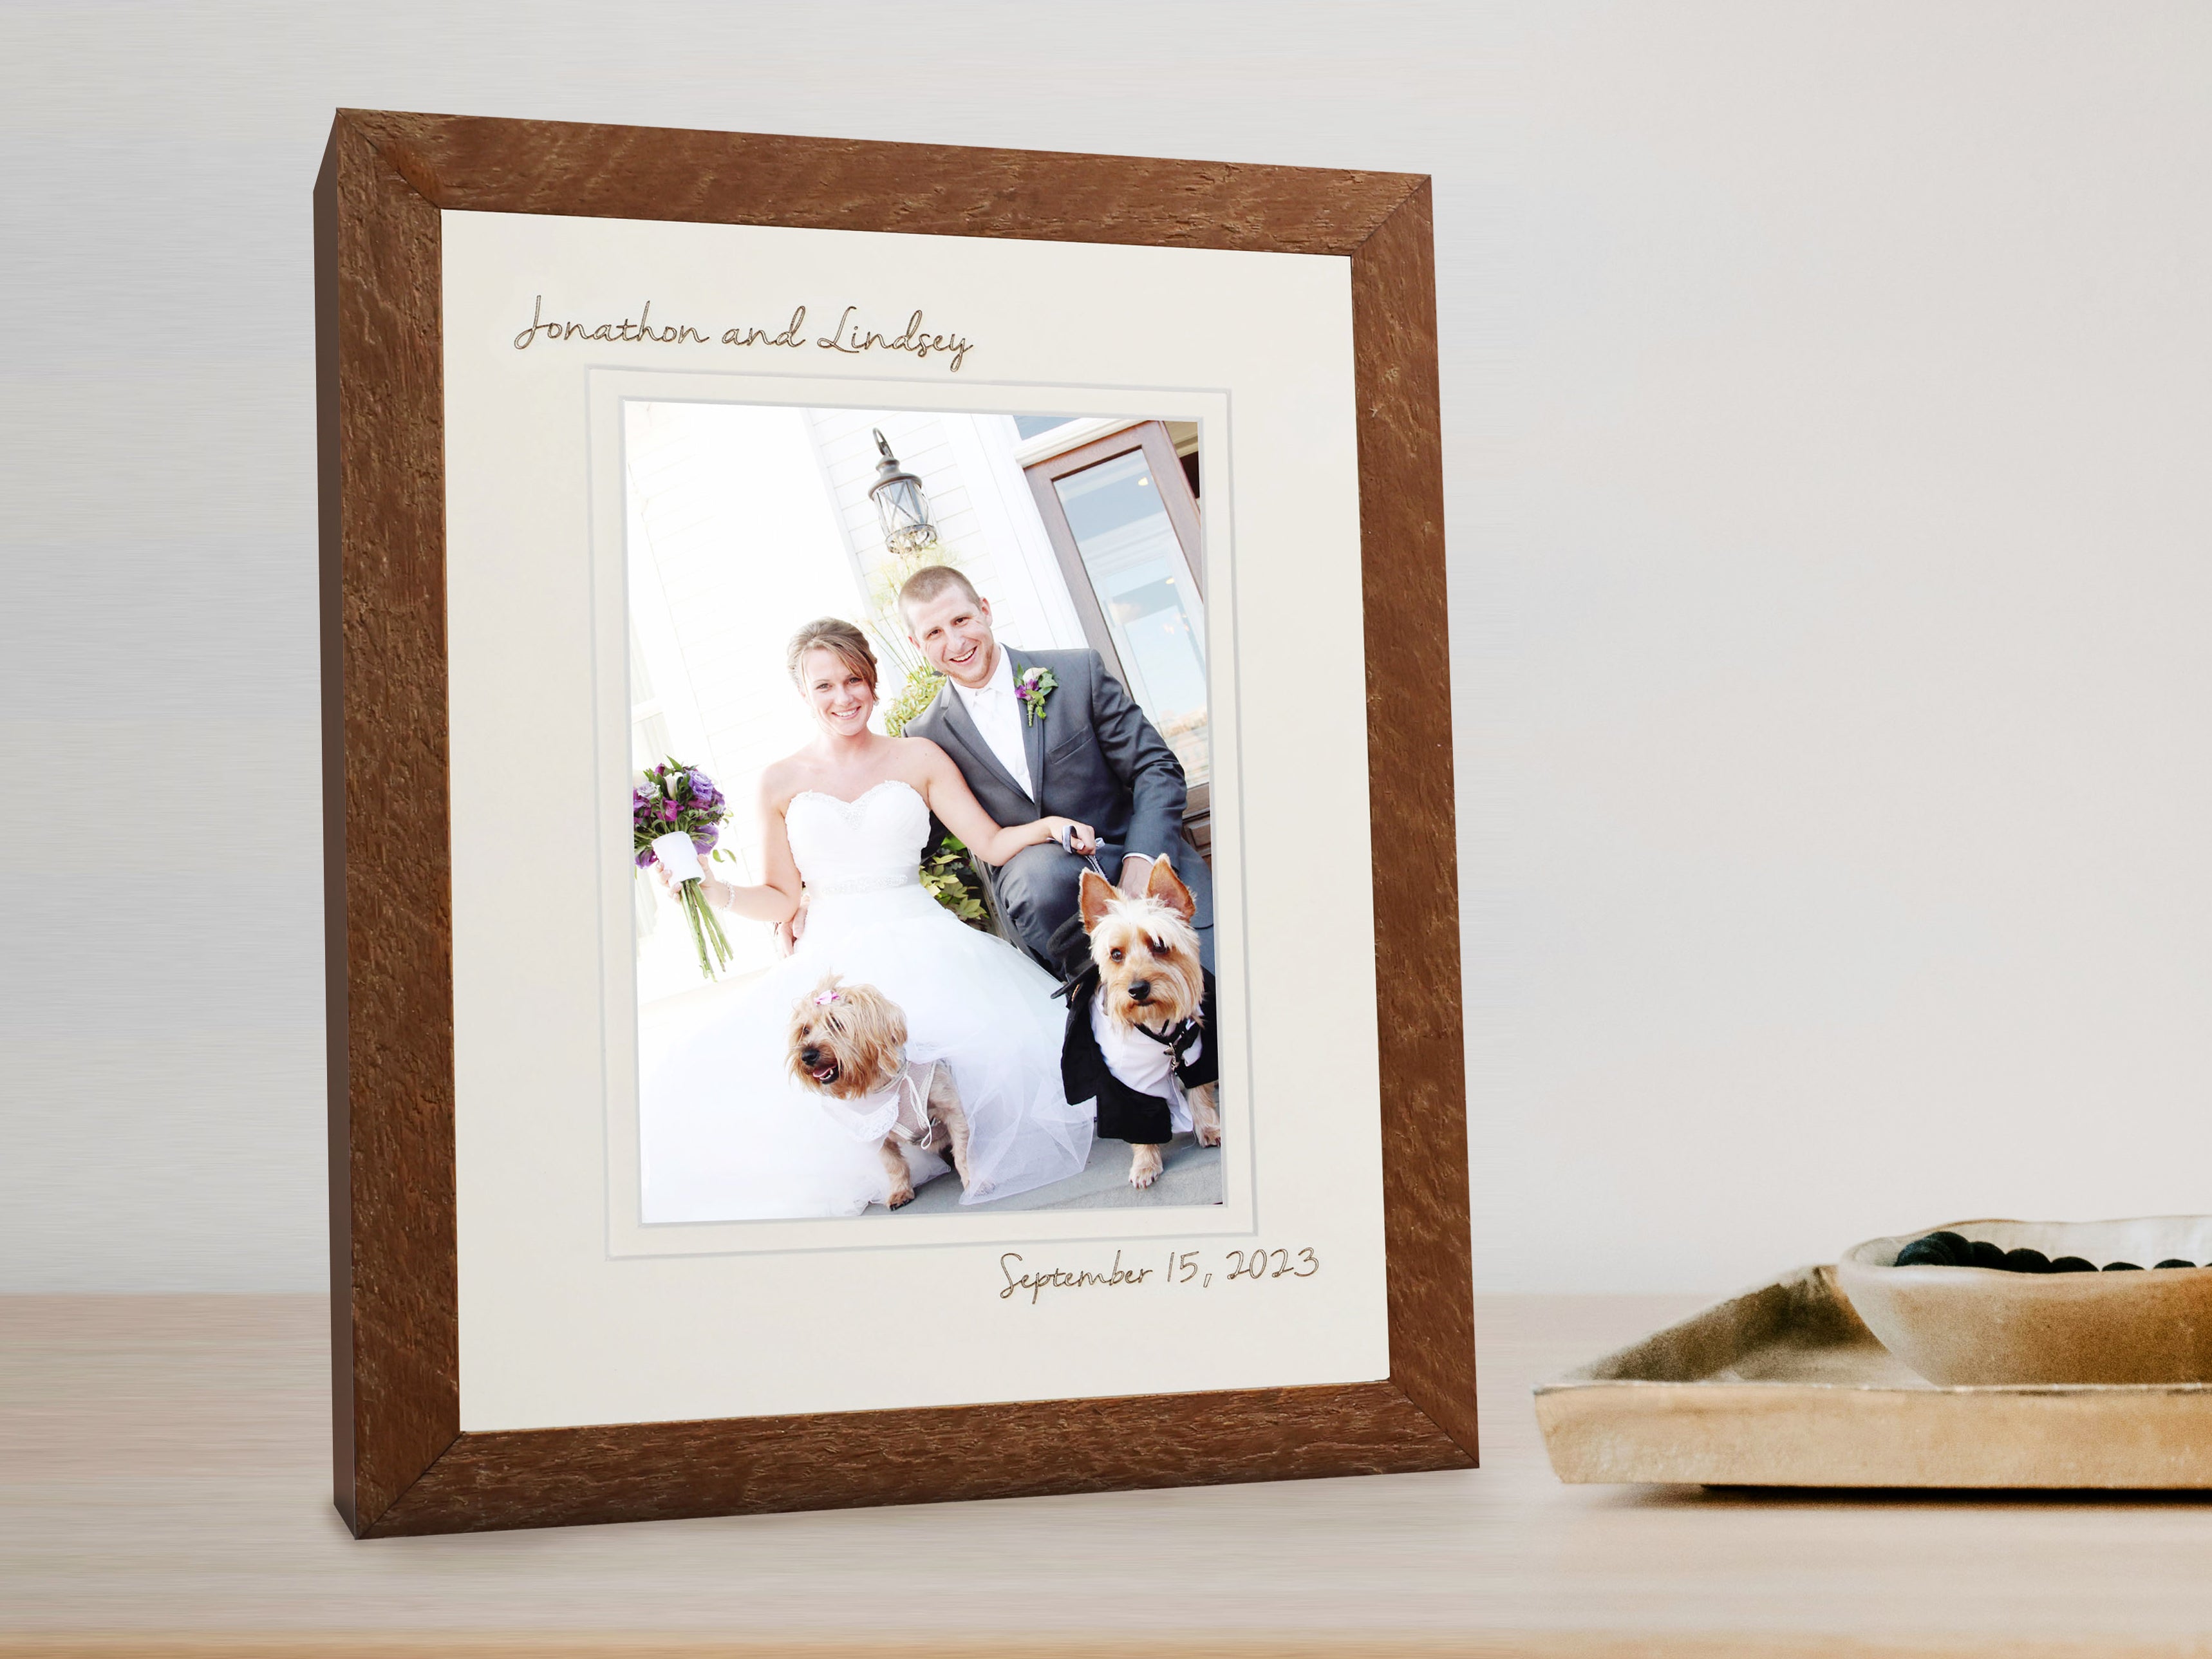 Personalized Rustic Frame 8x10 - showcases a 5x7 A great gift for engaged couples, newlweds and wedding anniversaries